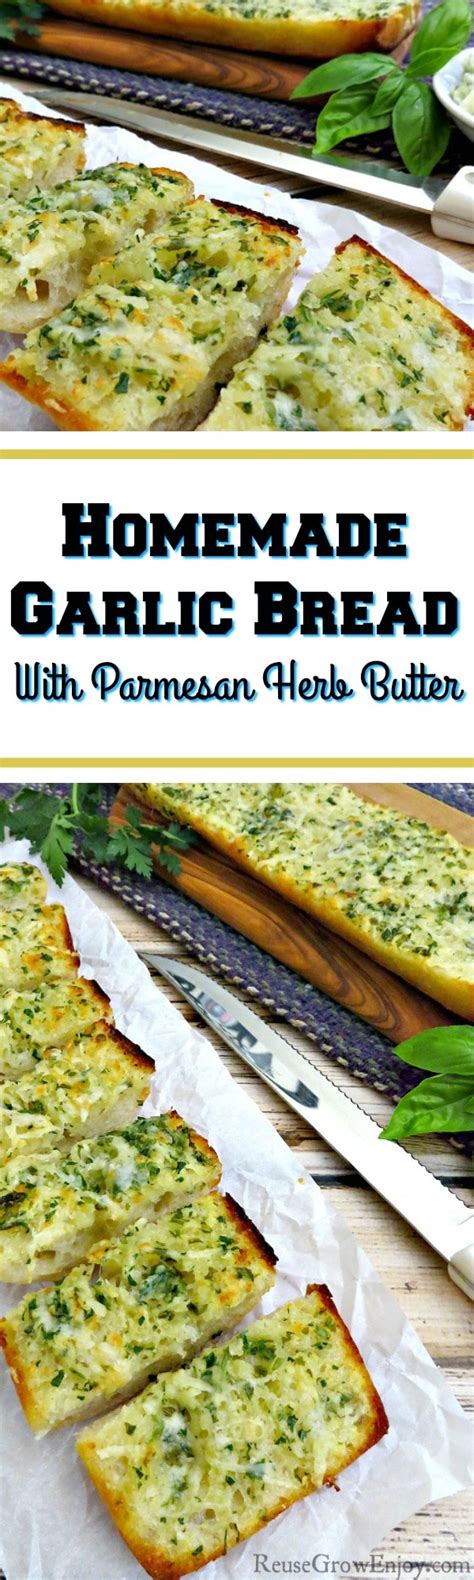 homemade-garlic-bread-with-parmesan-herb-butter image